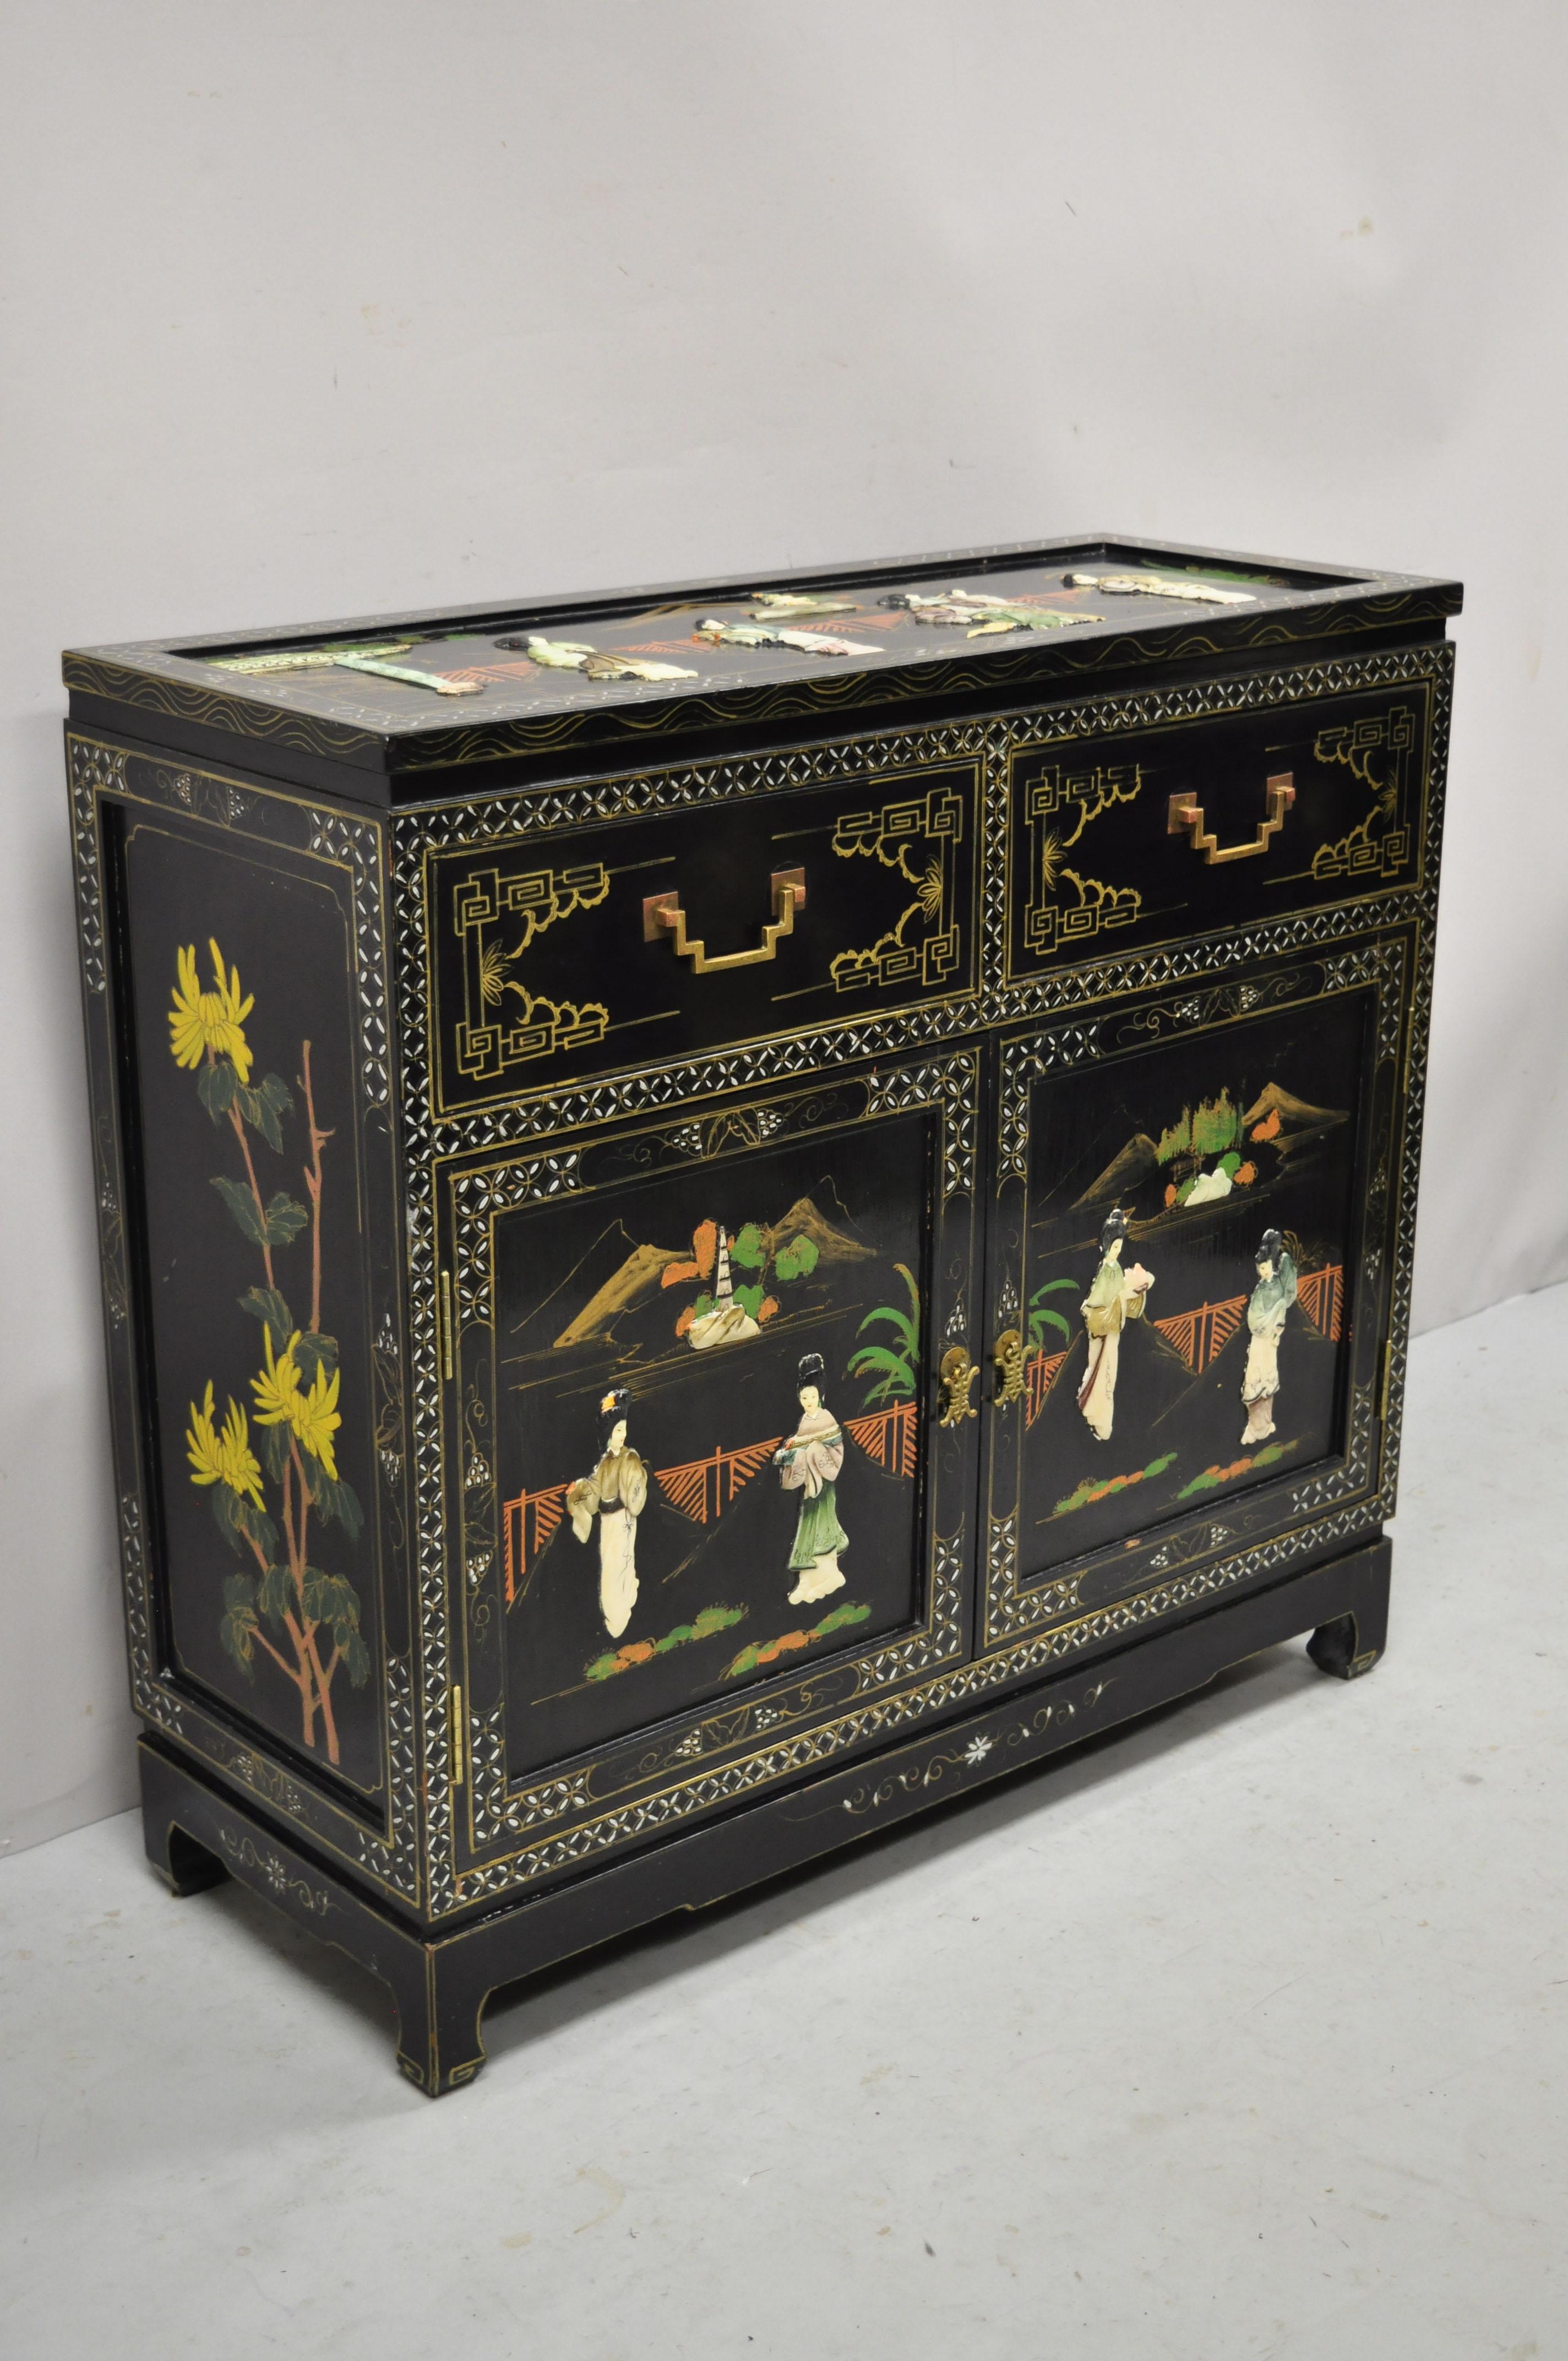 Vintage black lacquer oriental Chinese Export carved soapstone figural buffet cabinet. Item features carved soapstone figures, black lacquer finish, 2 swing doors, 2 drawers, solid brass hardware, great style and form. Circa mid to late 20th